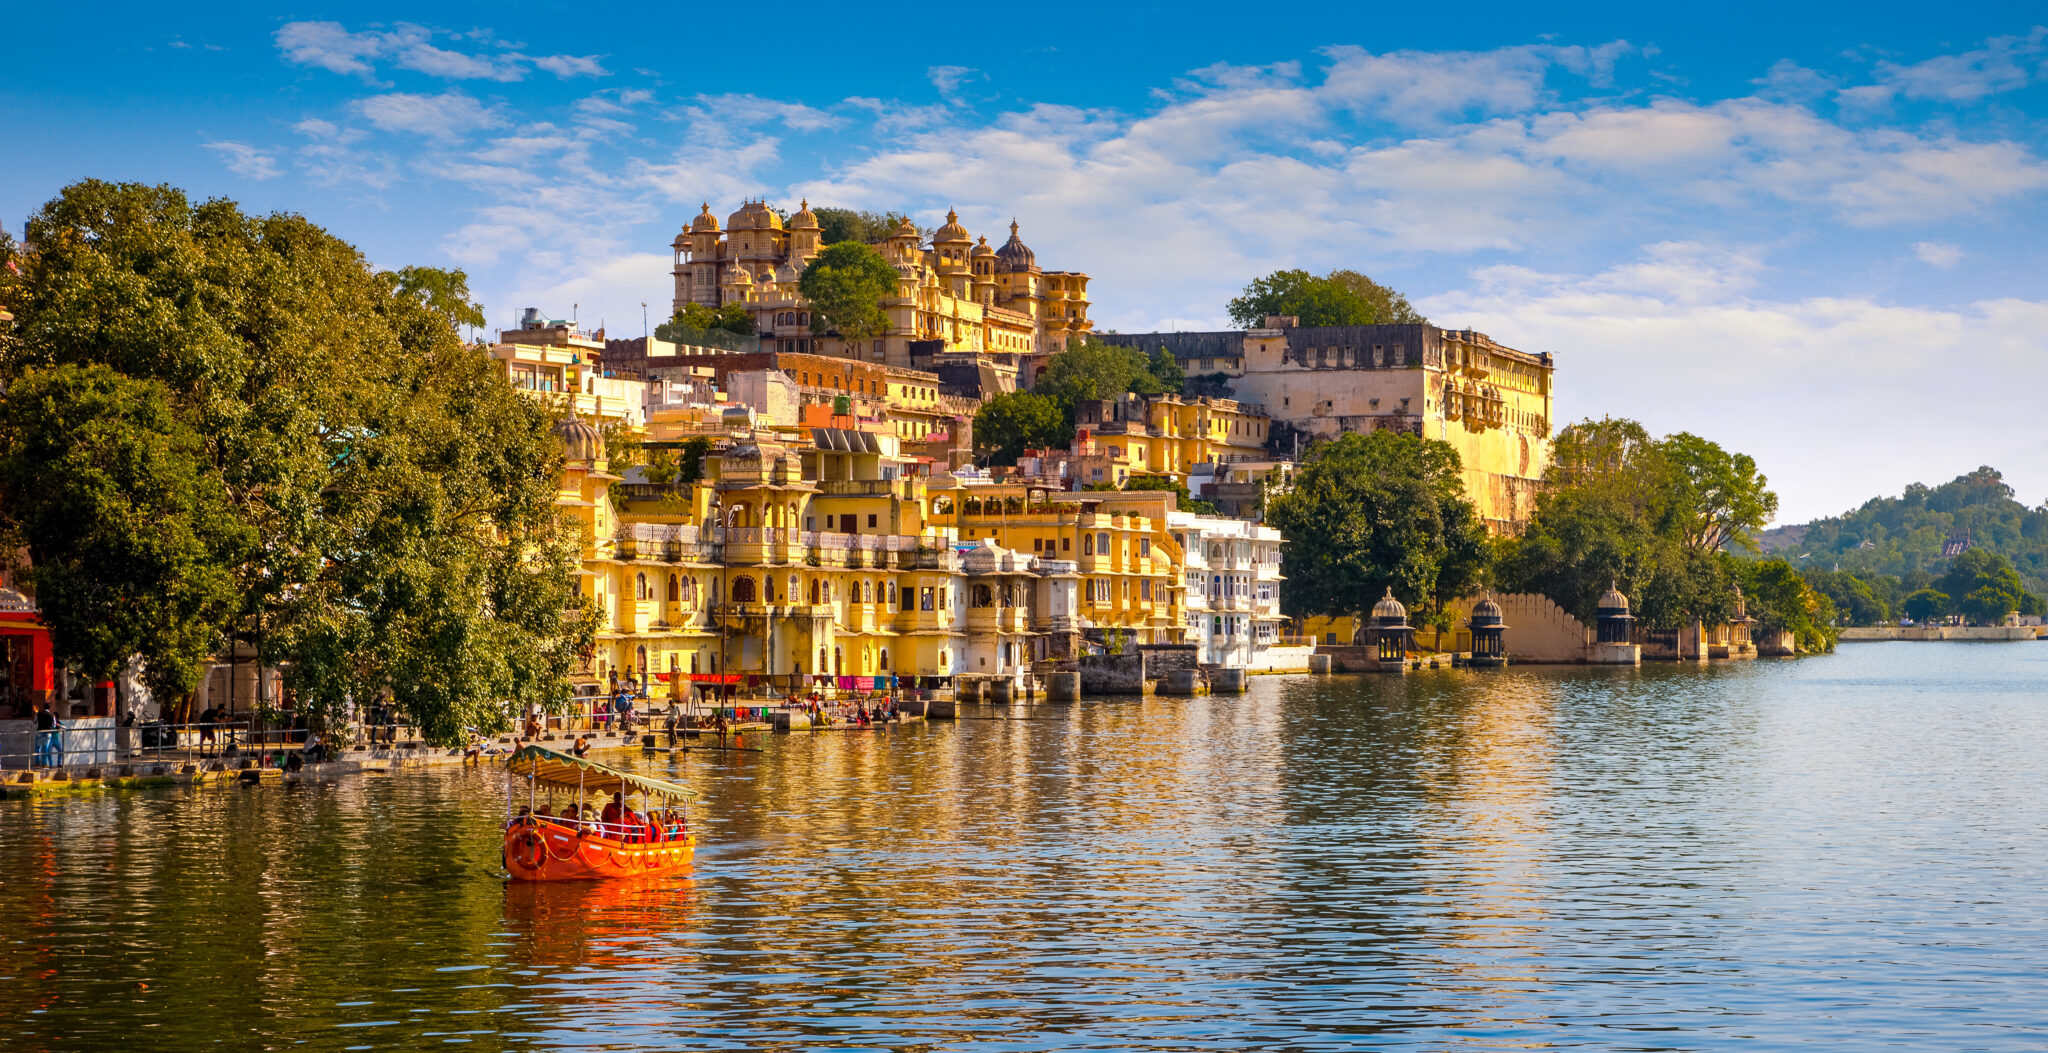 City Palace and Pichola lake in Udaipur, India - Globetrender